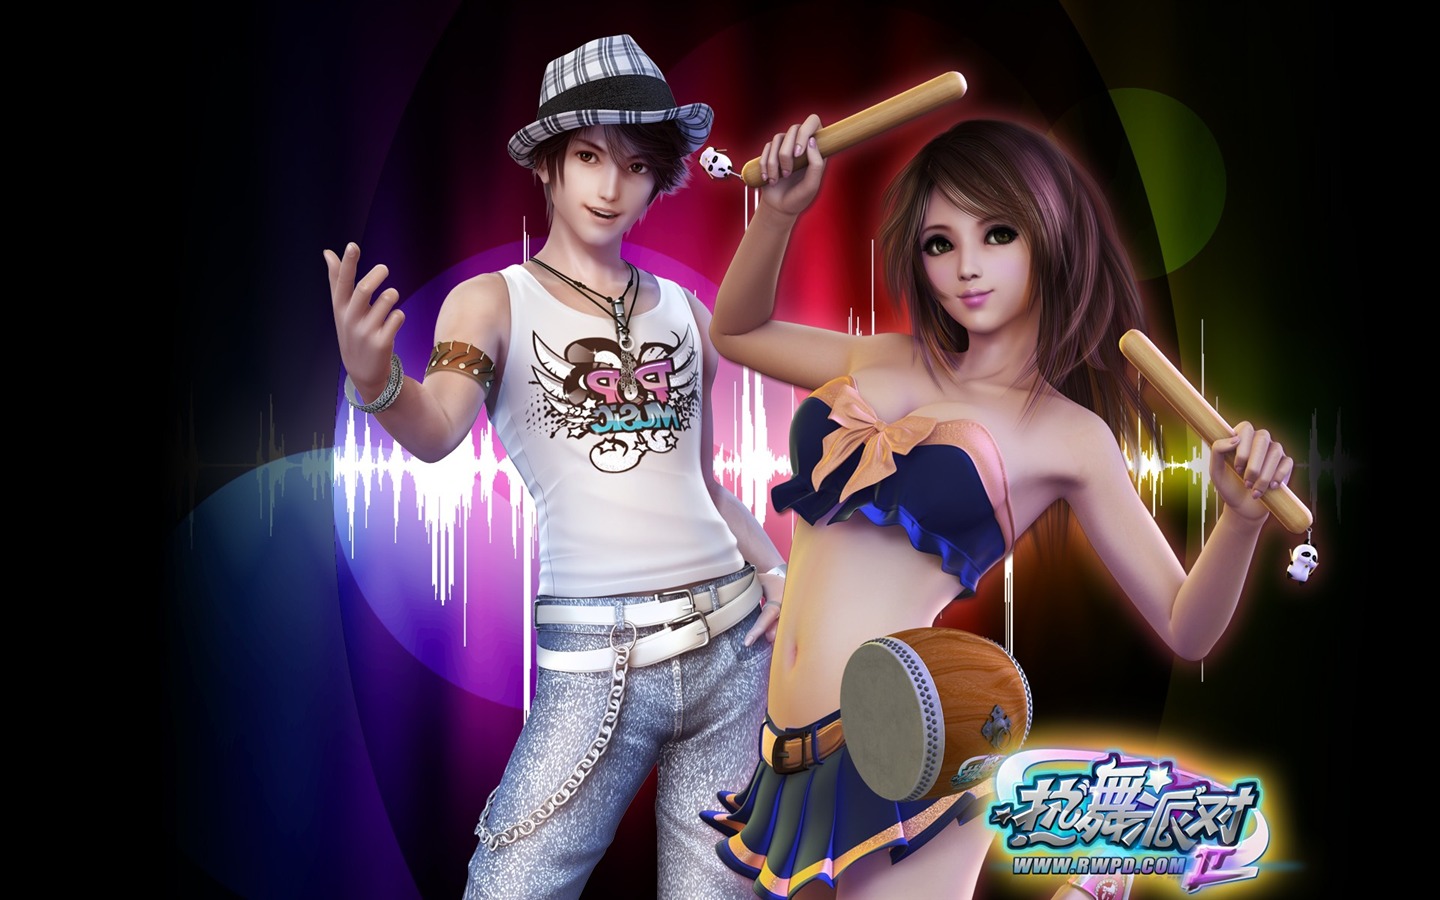 Online game Hot Dance Party II official wallpapers #20 - 1440x900